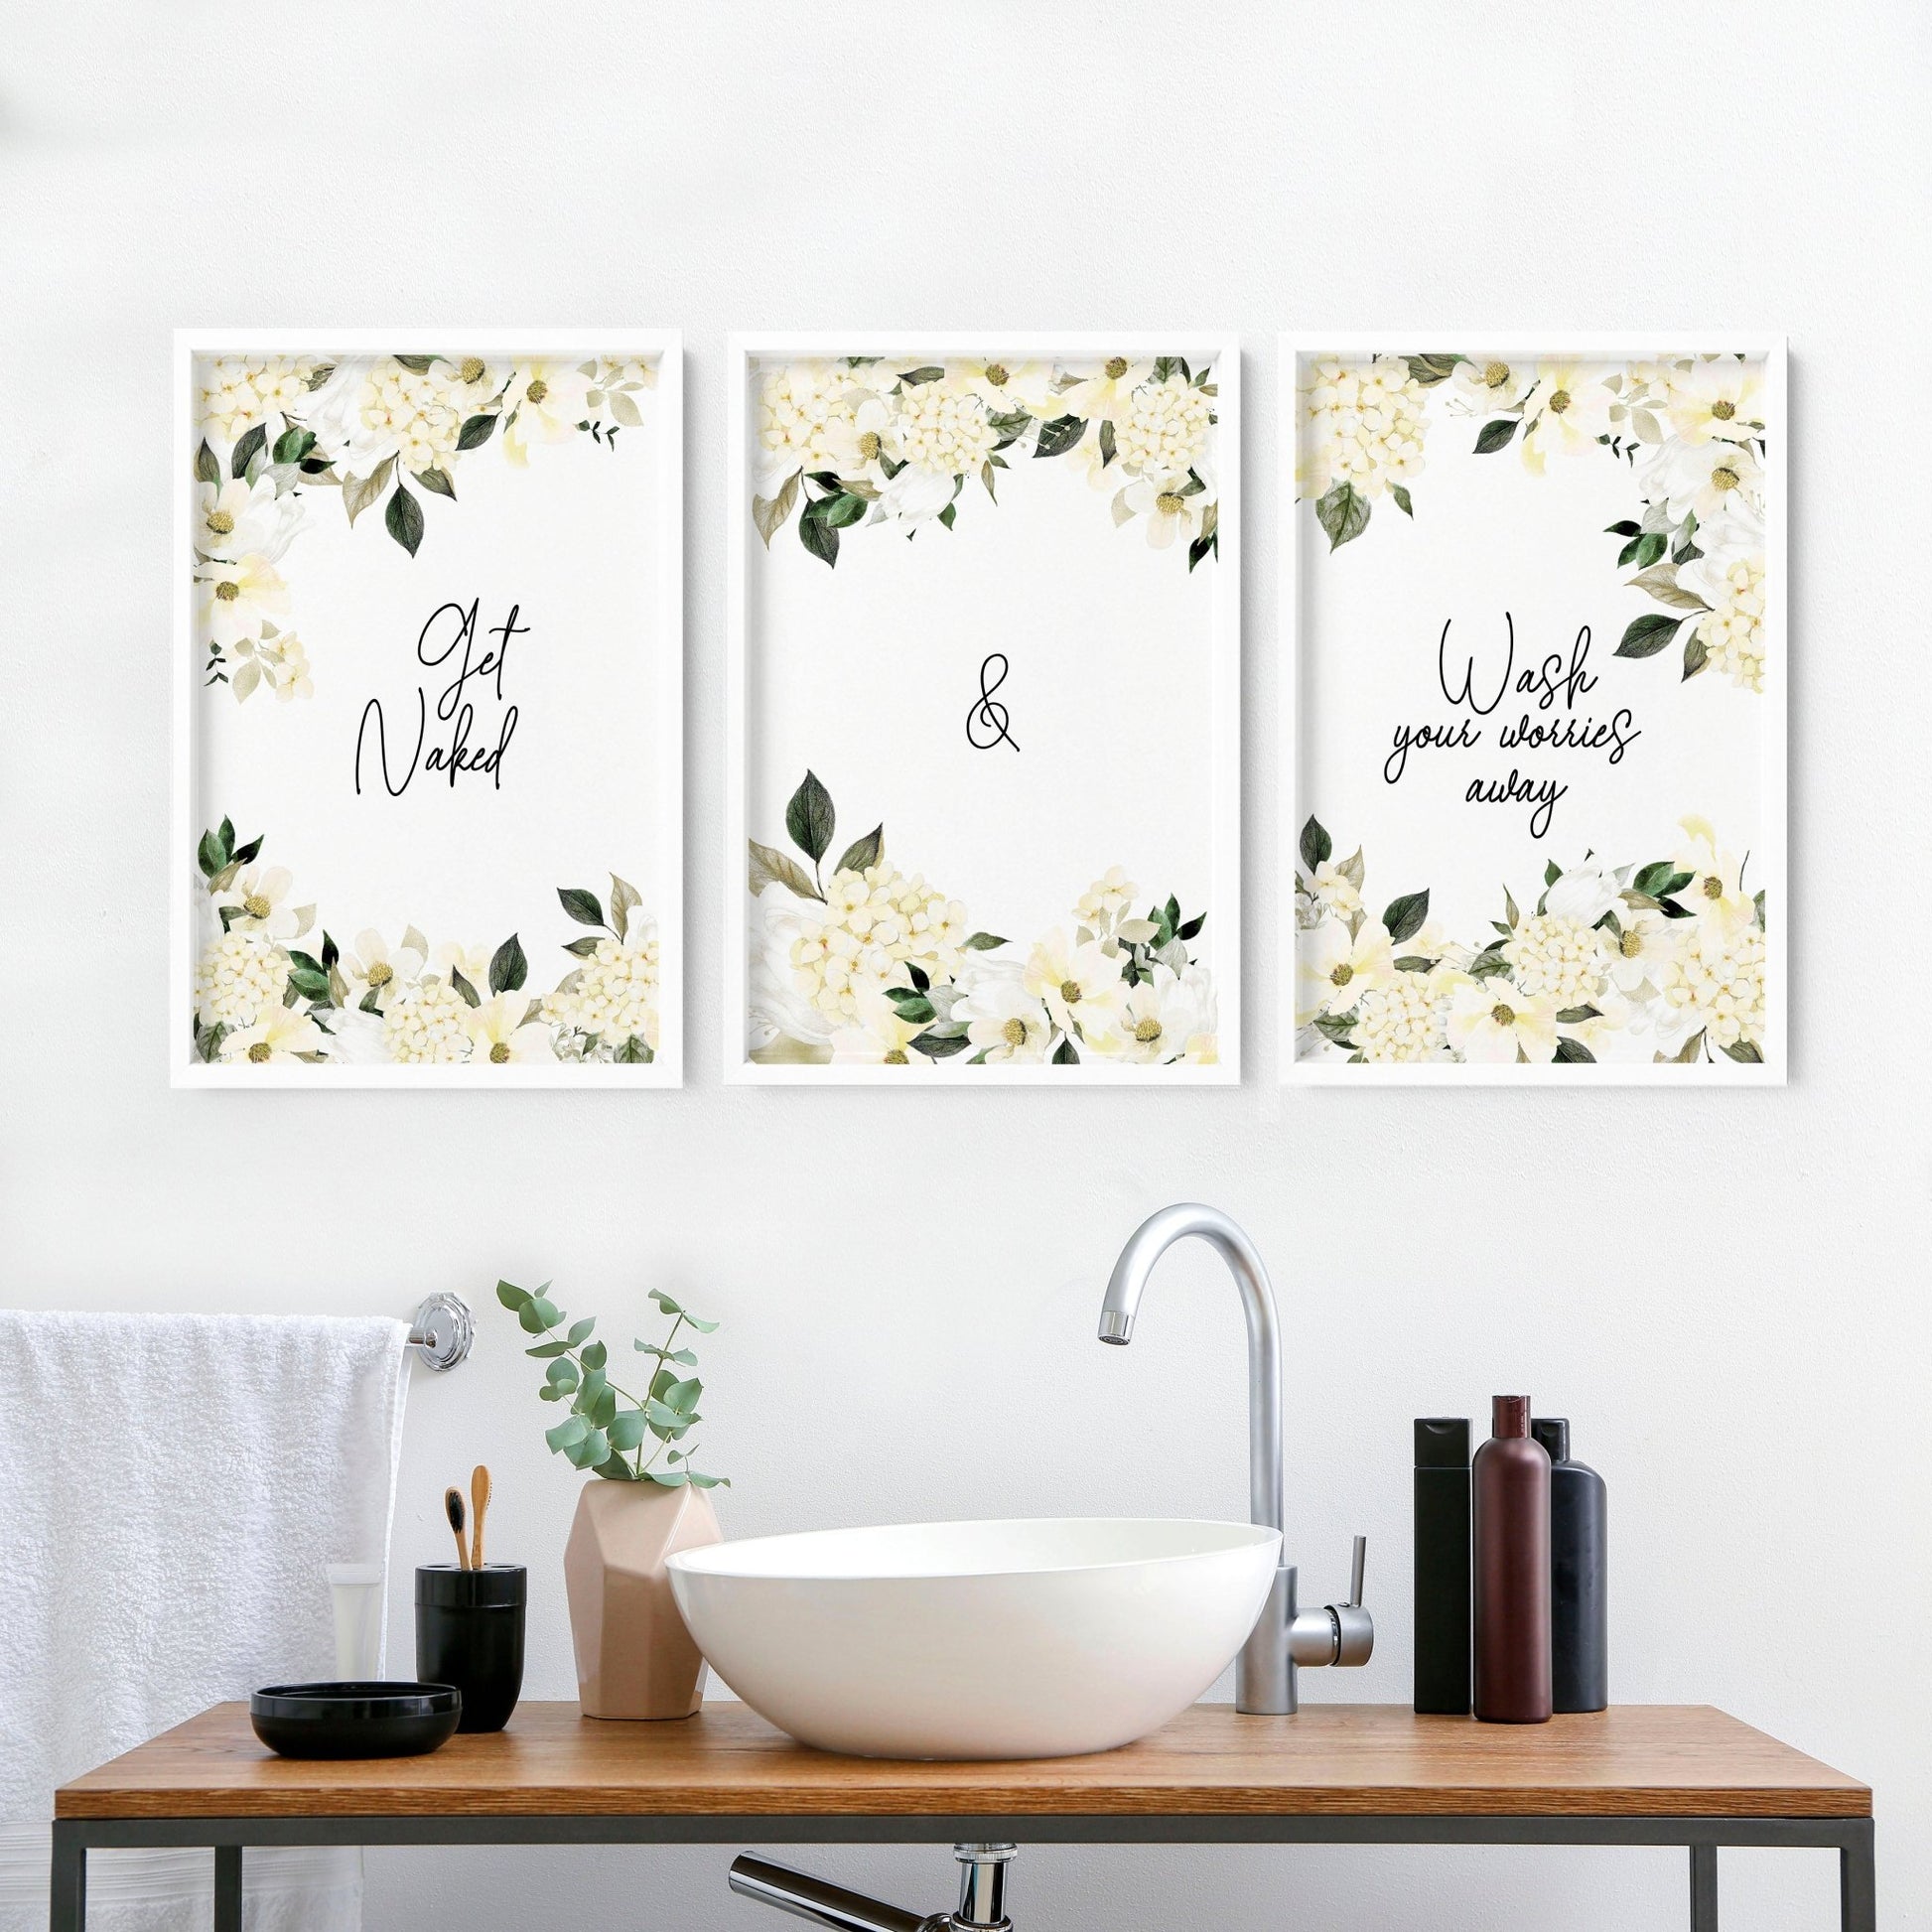 Shabby Chic bathroom prints | set of 3 wall art - About Wall Art